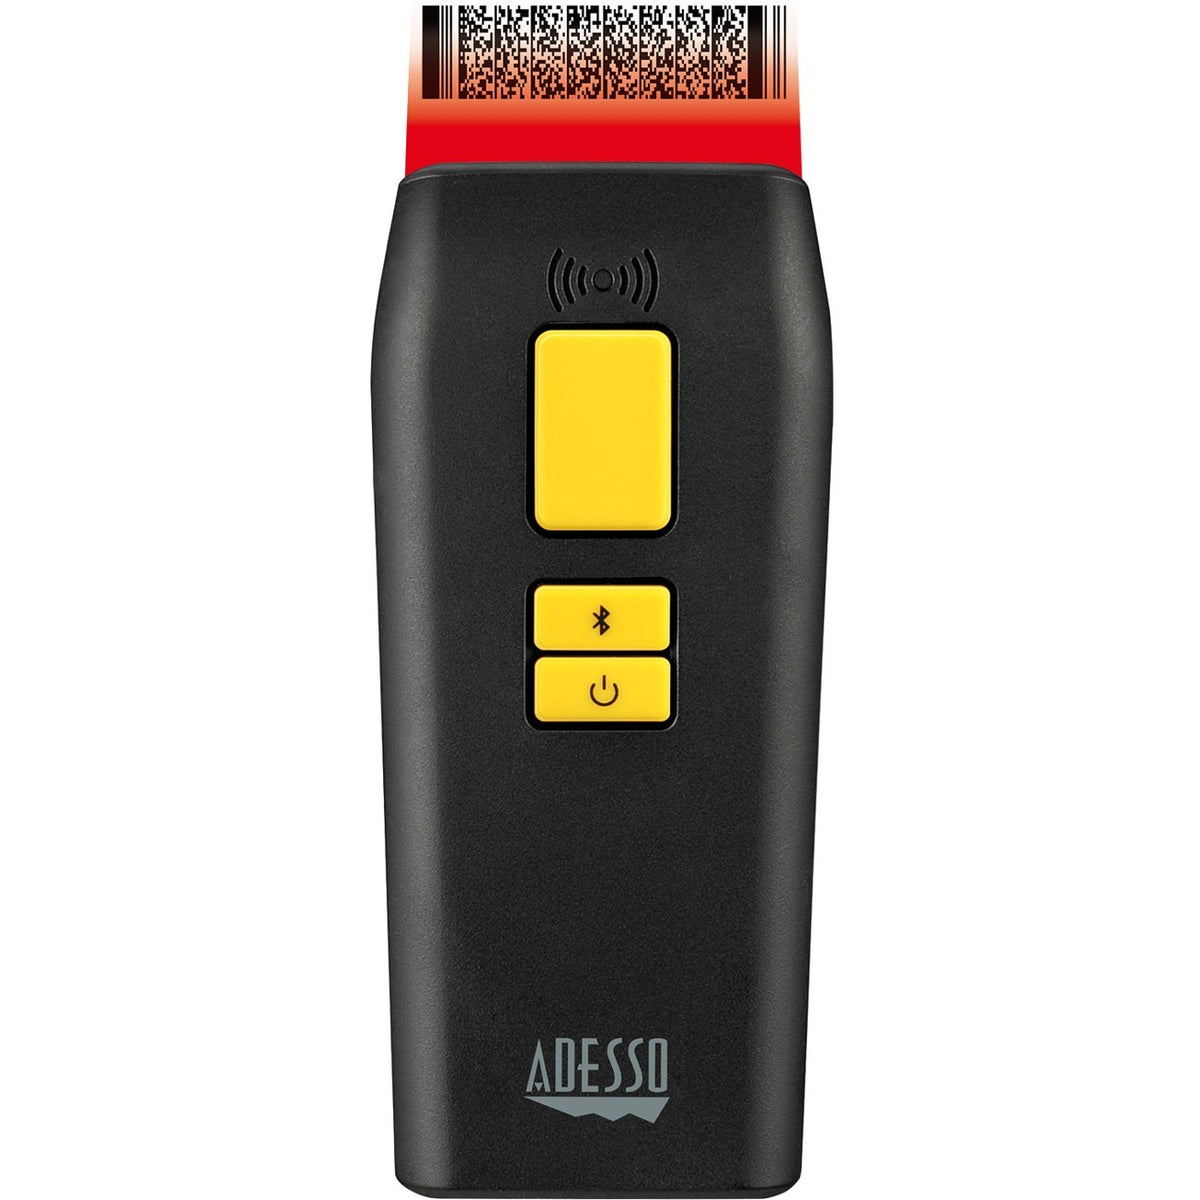 Adesso NuScan 3500TB Bluetooth Antimicrobial Waterproof 2D Barcode Scanner - NUSCAN 3500TB